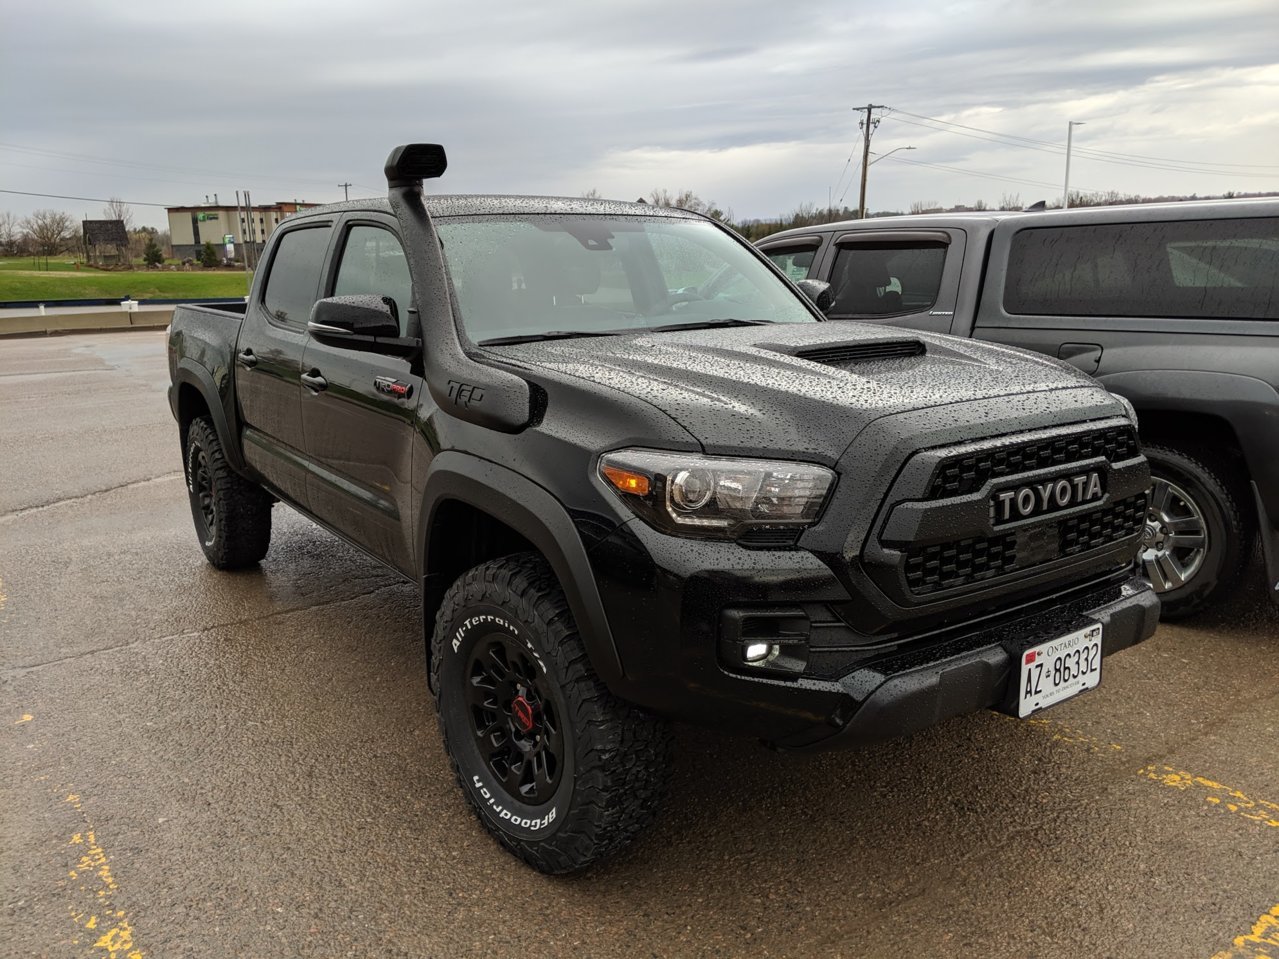 Heres A Look At The Snorkel On The Toyota Tacoma Trd Pro 45 Off